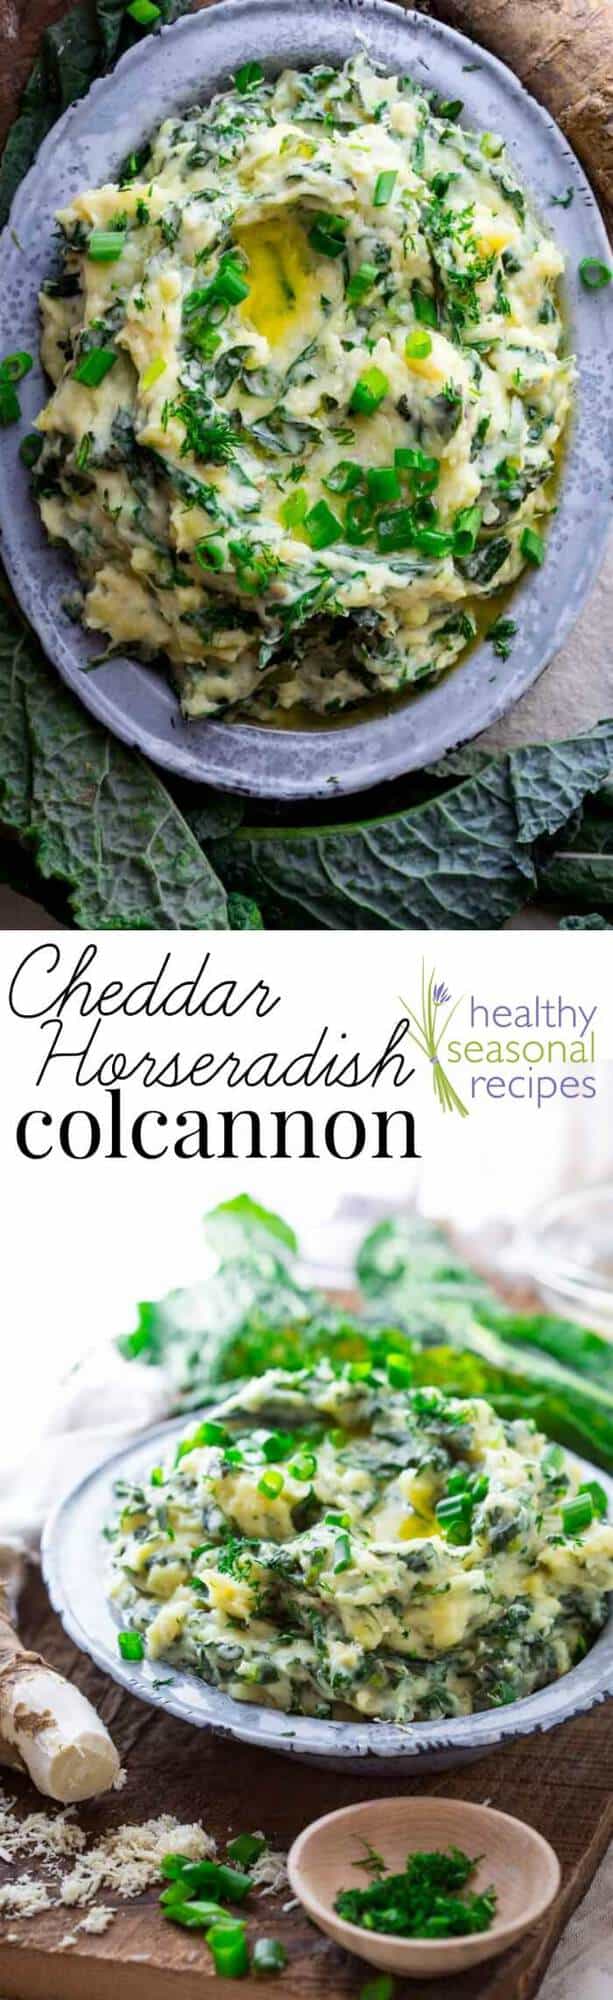 Colcannon with kale photo collage with text overlay